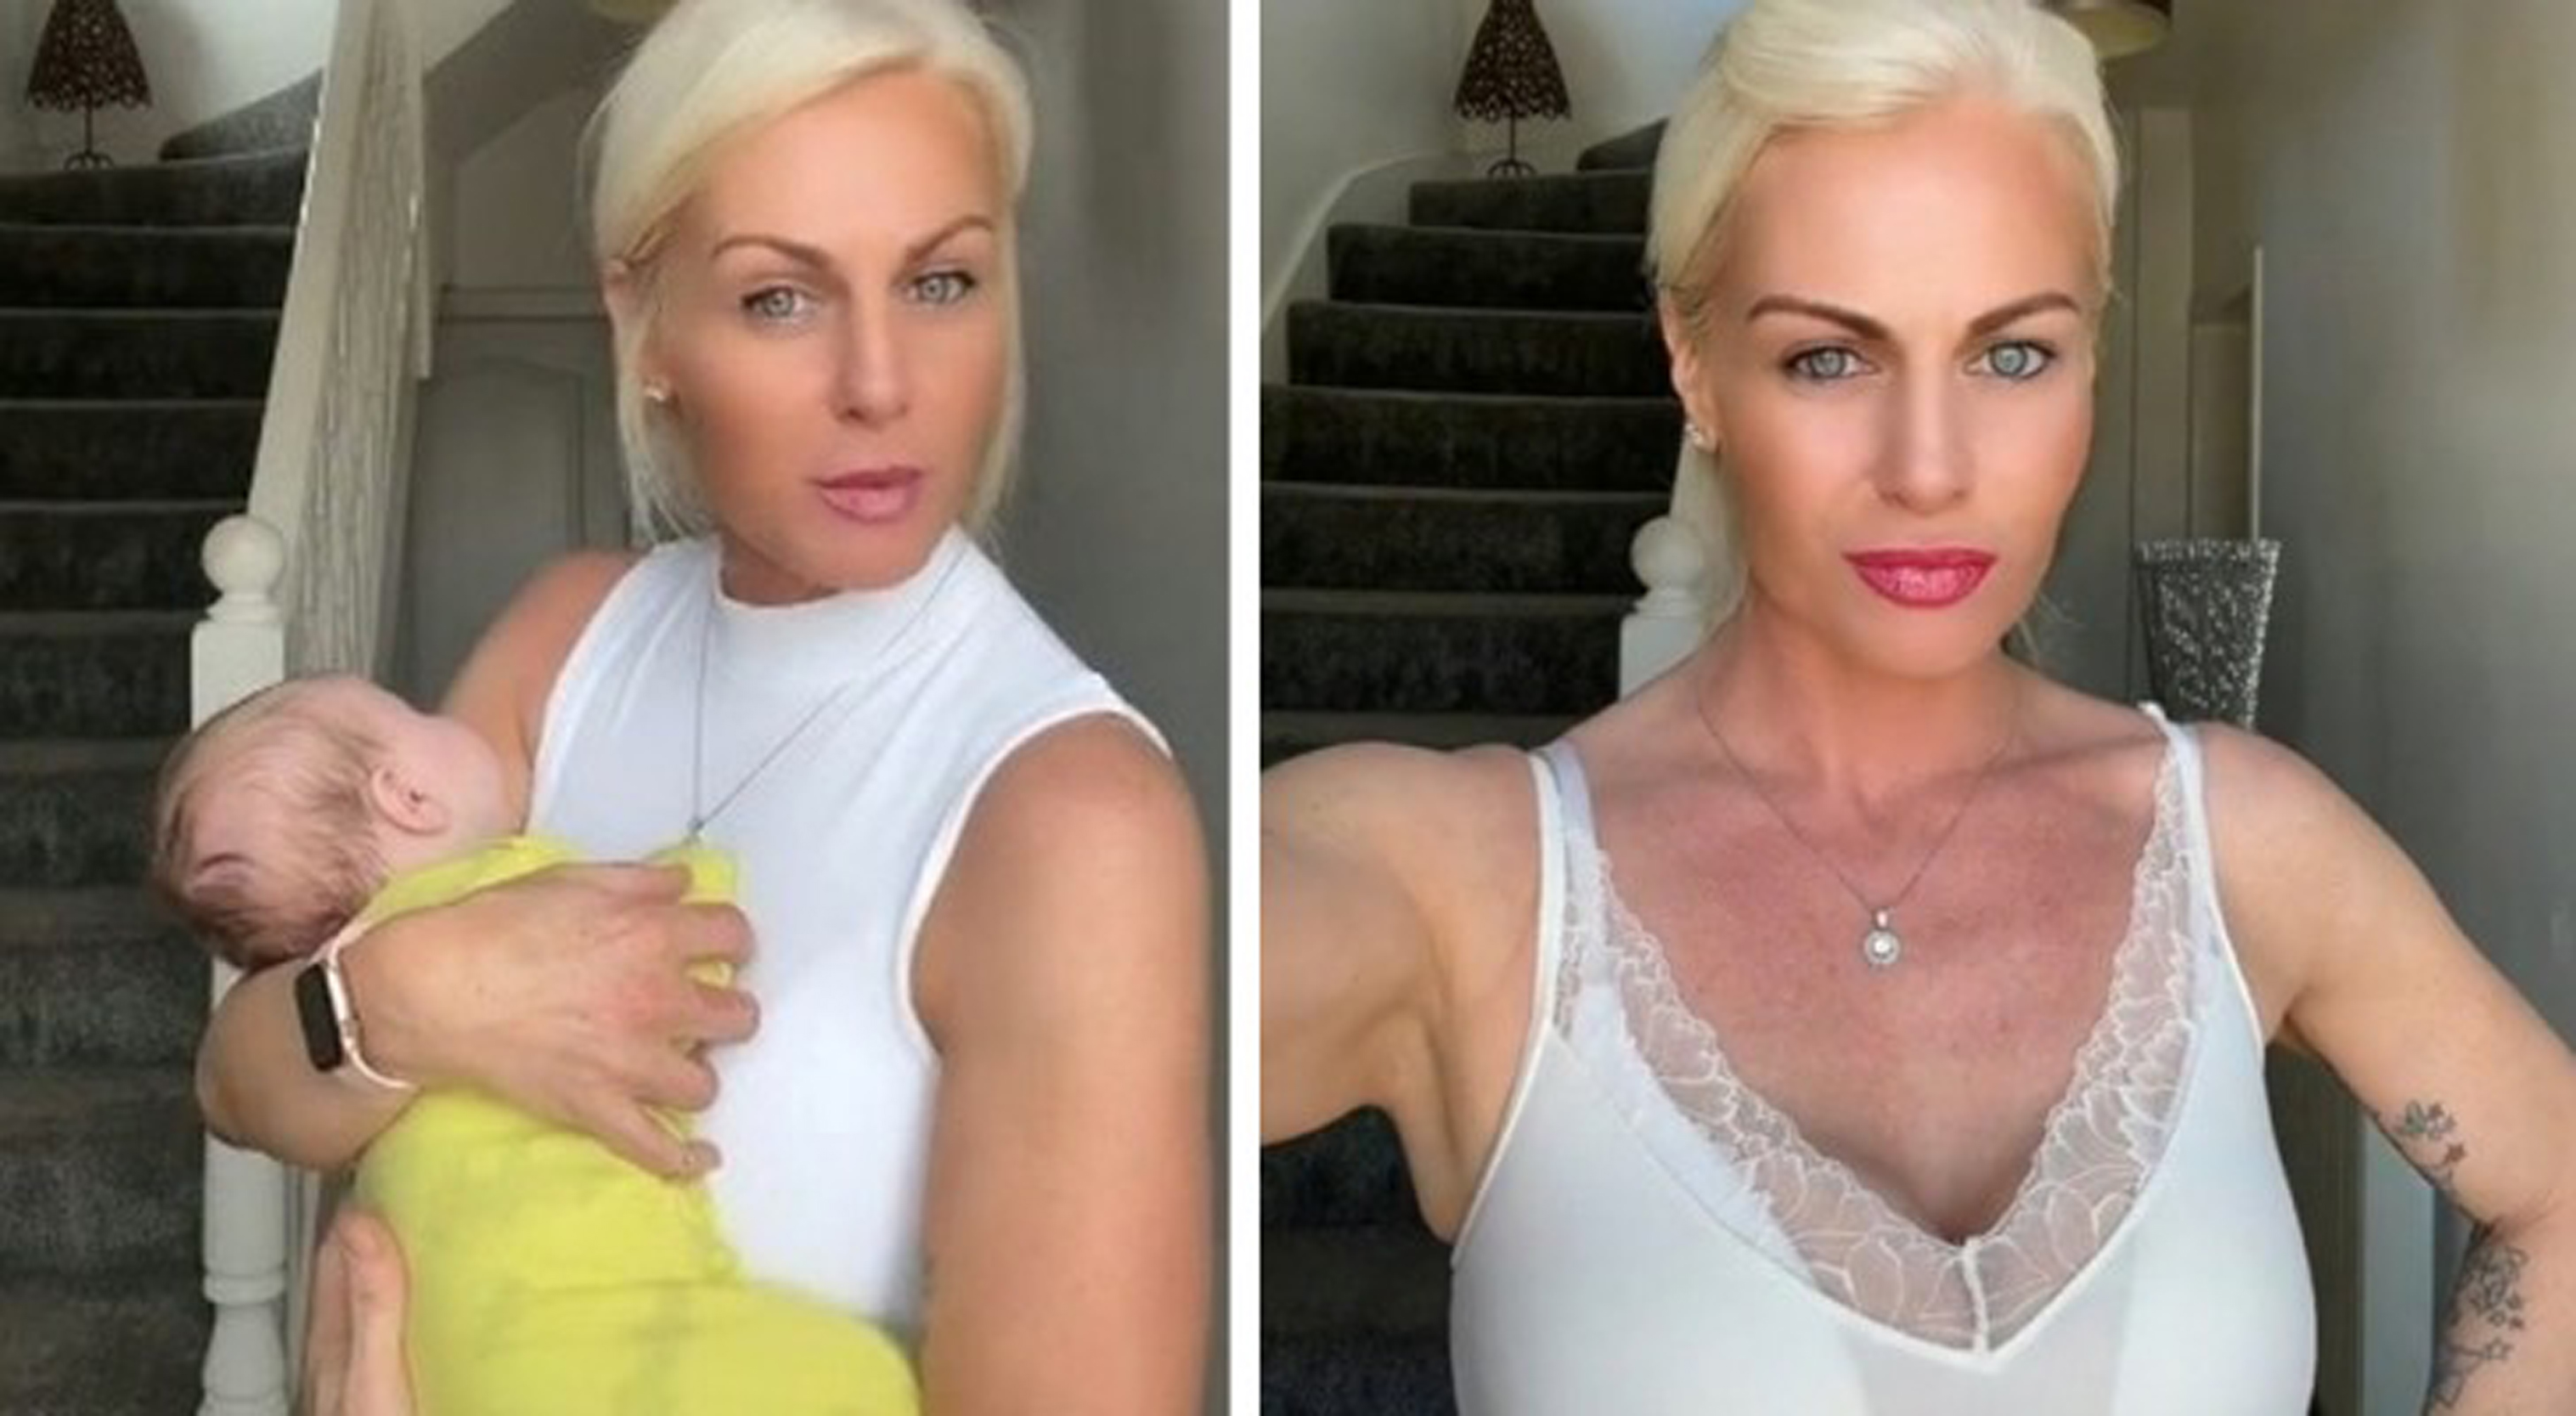 Woman claims to be a 44-year-old grandmother, but many believe she is lying about her age